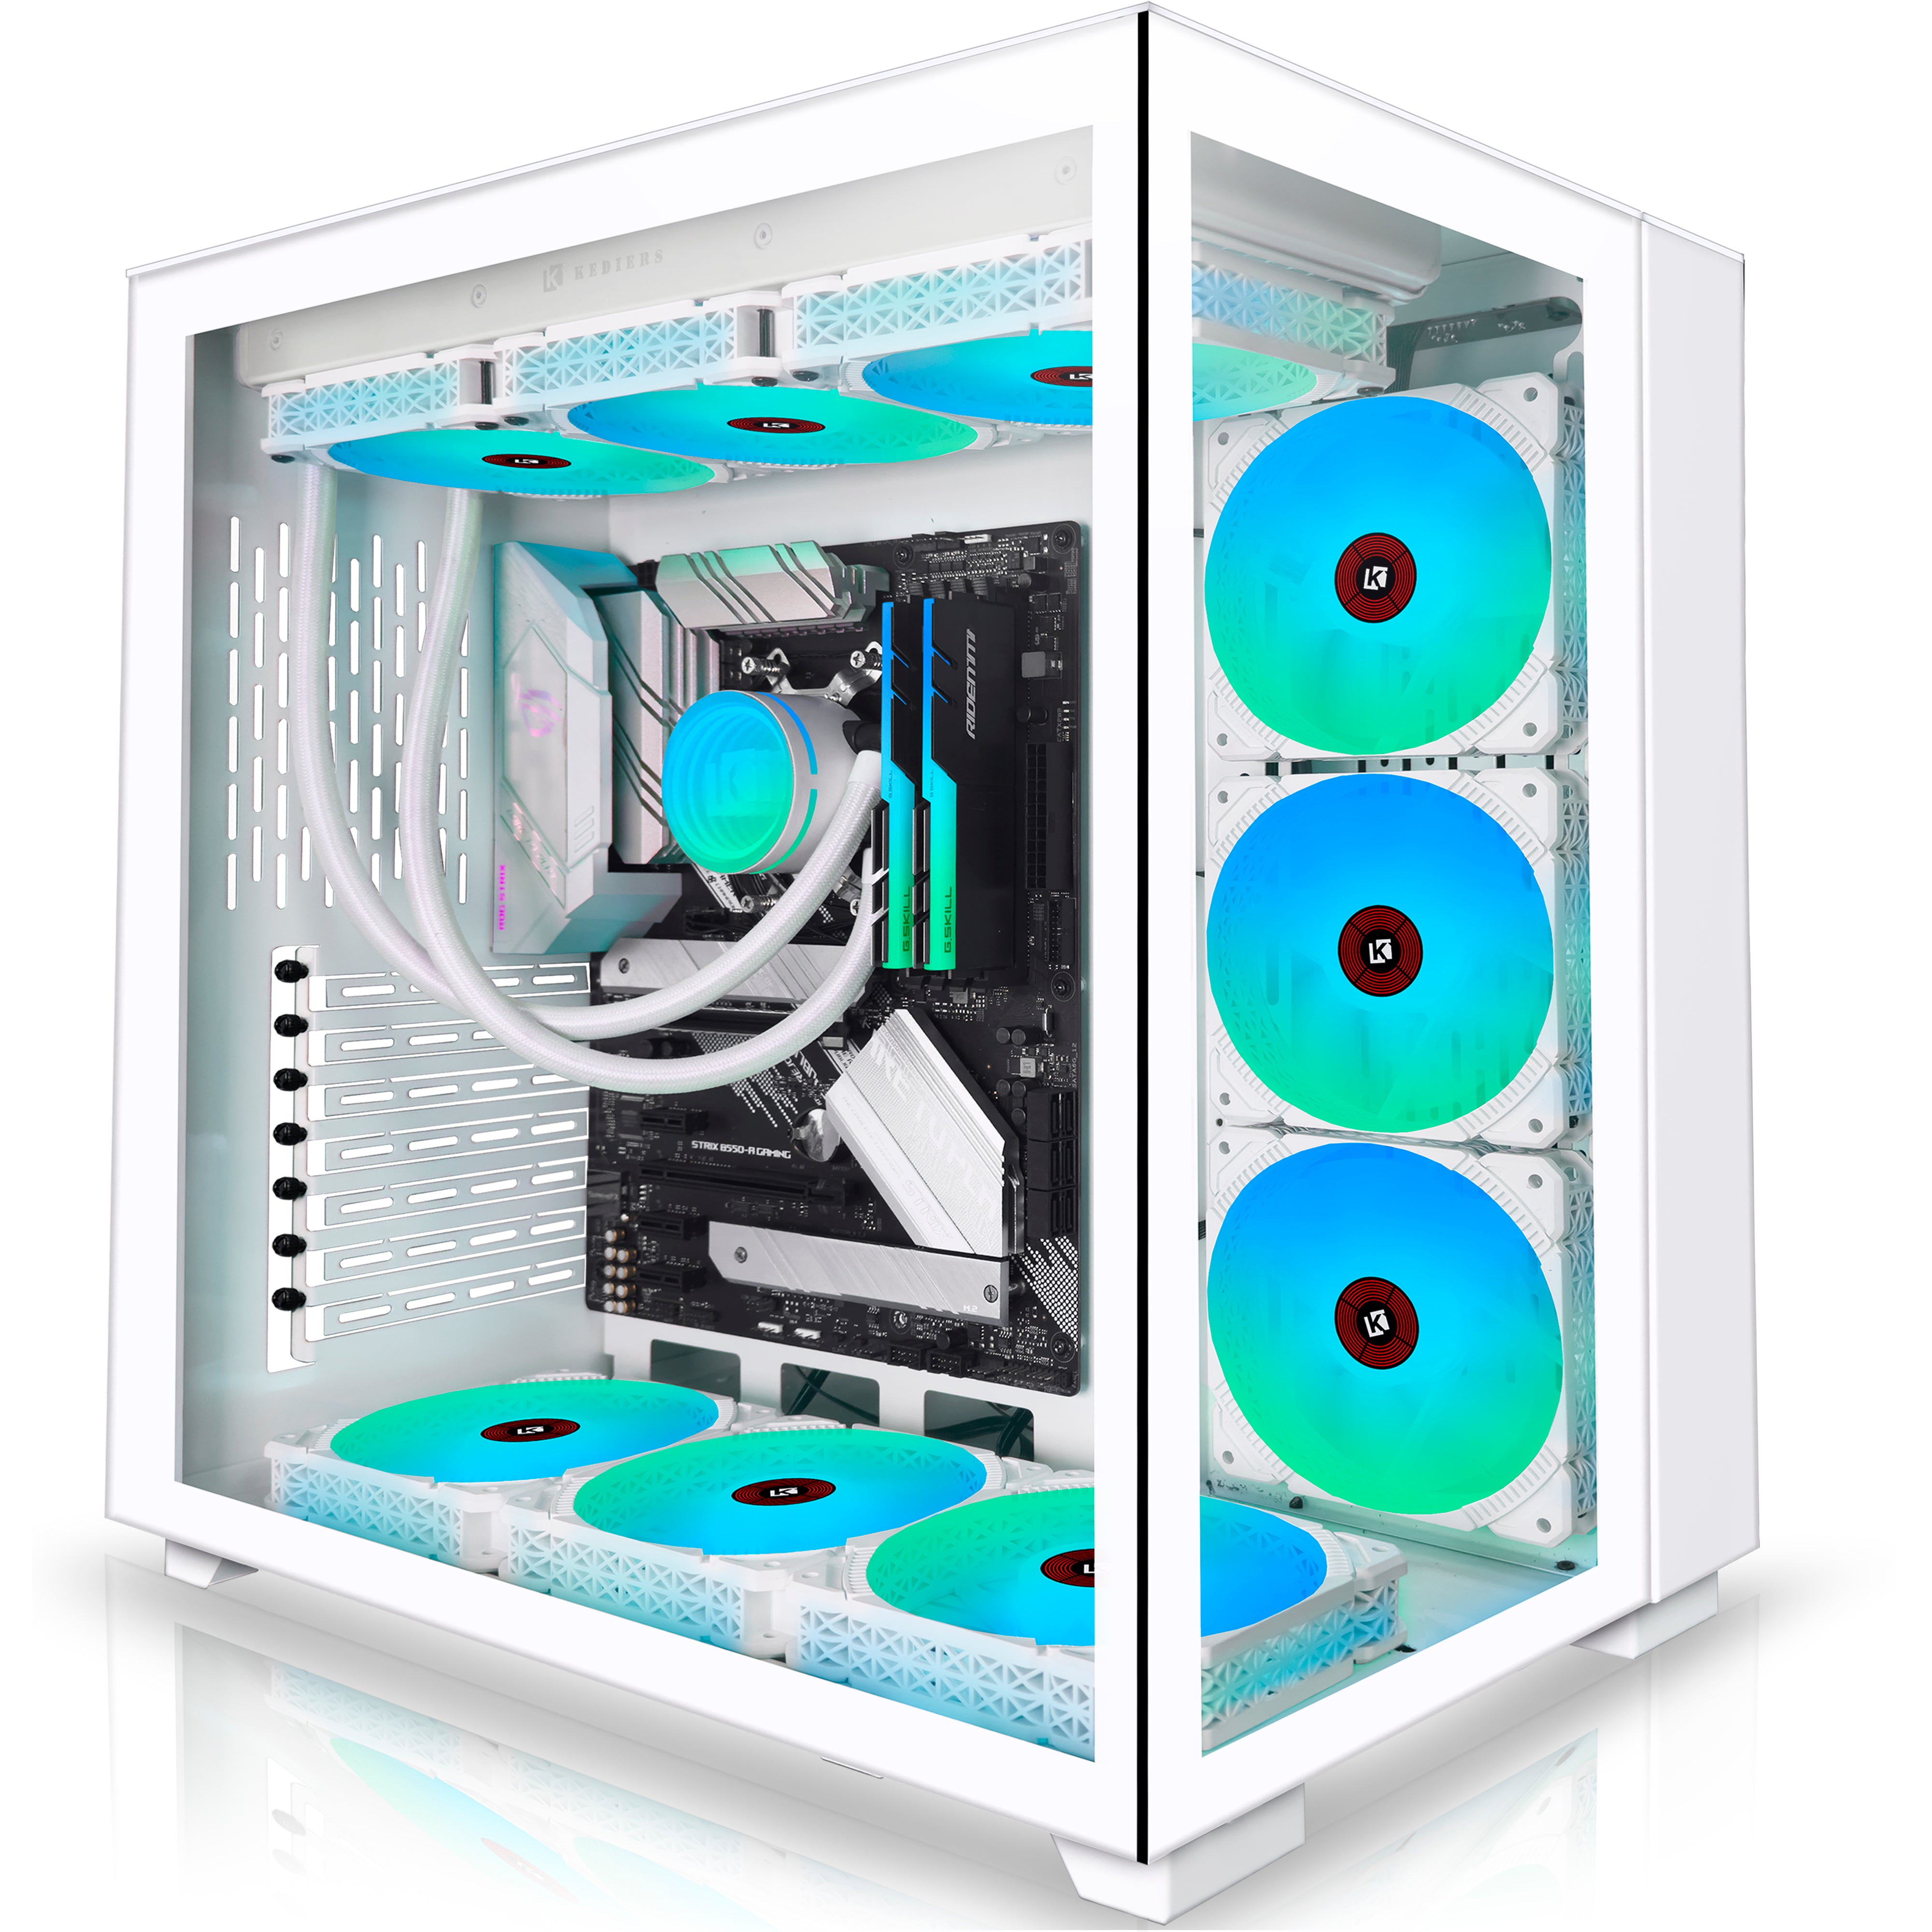 KEDIERS Mid-Tower ATX PC Case with 9pcs 120mm ARGB Fans, Mesh Computer